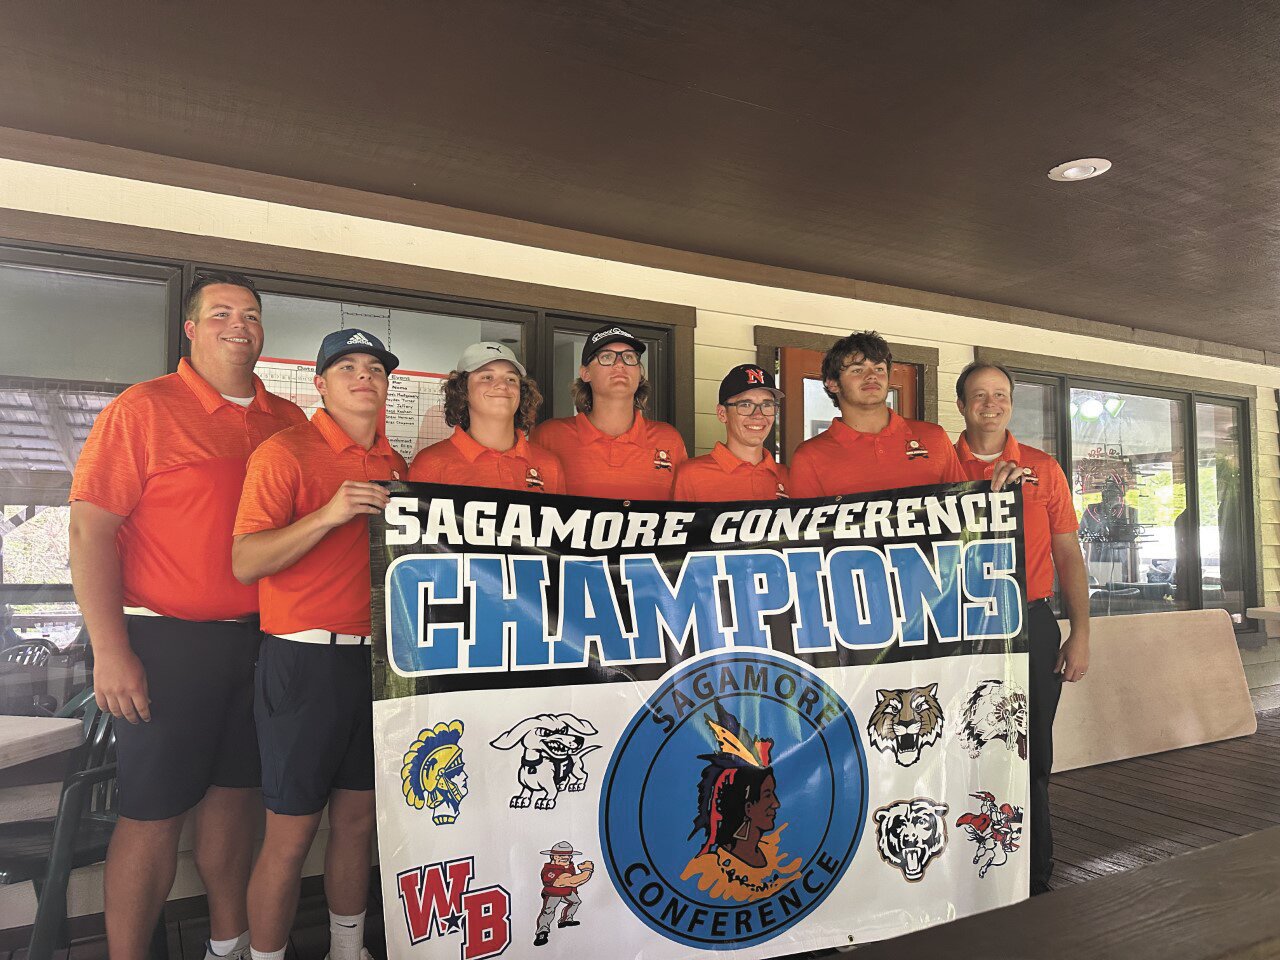 North Montgomery boys golf made school history by capturing their first Sagamore Conference title on Saturday. Pictured from L-R are head coach Bob Ryker, Hayden Turner, Neal Jeffery, Haze Kashon, Alex Chapman, Drew Norman and assistant coach Scott Yeager.